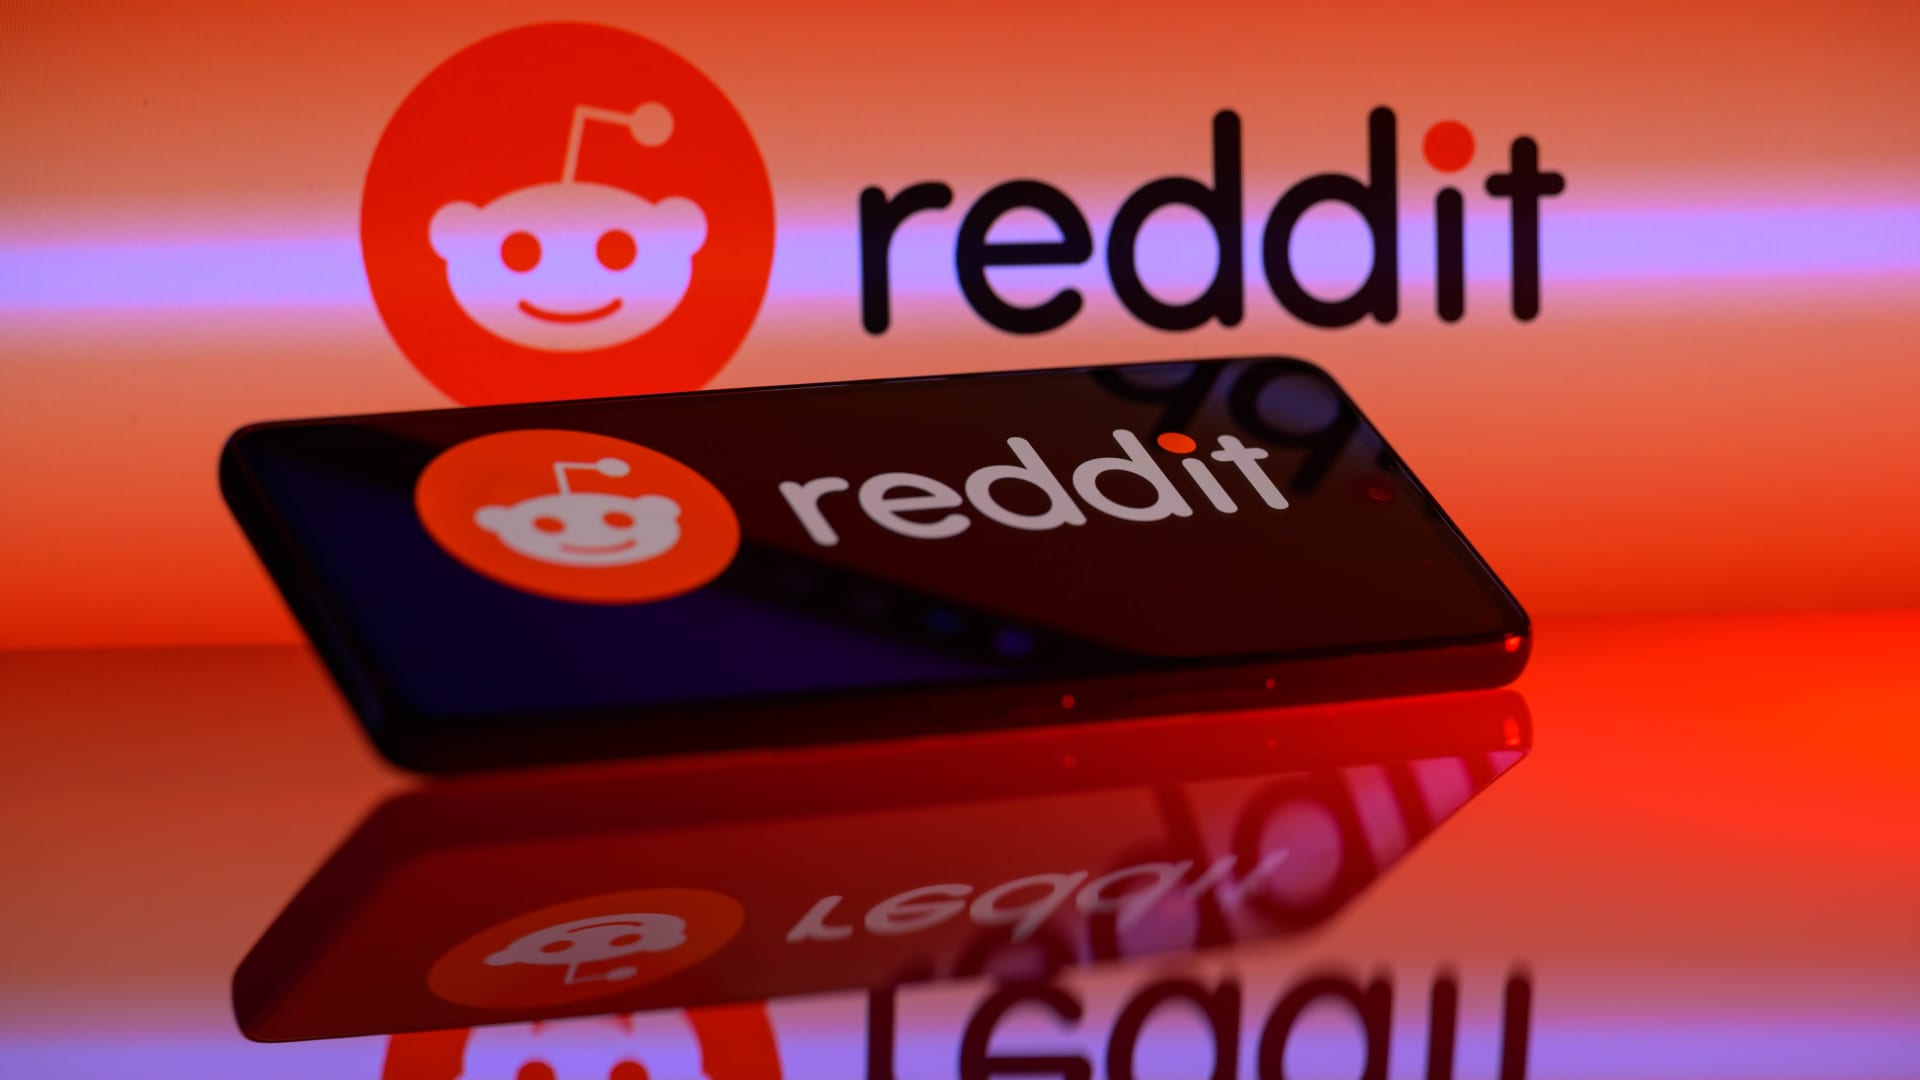 Reddit power users balk at chance to participate in IPO as Wall Street debut nears